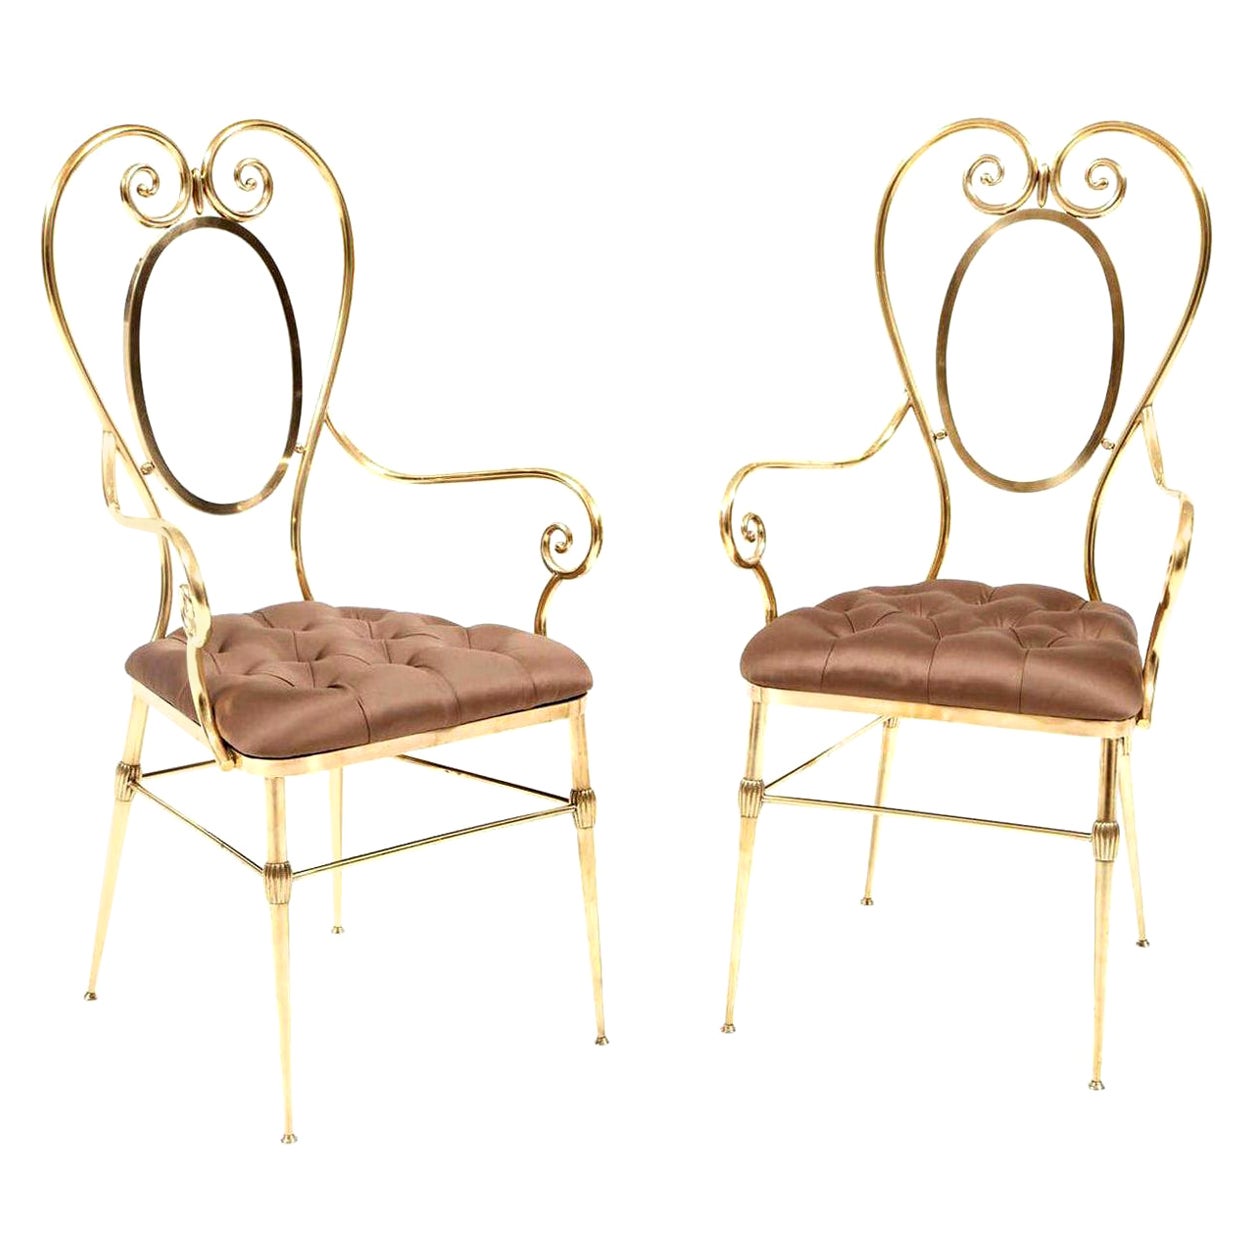 Chairs, Pair of Brass Chairs with Silk Upholstery, Midcentury Design, Curvy